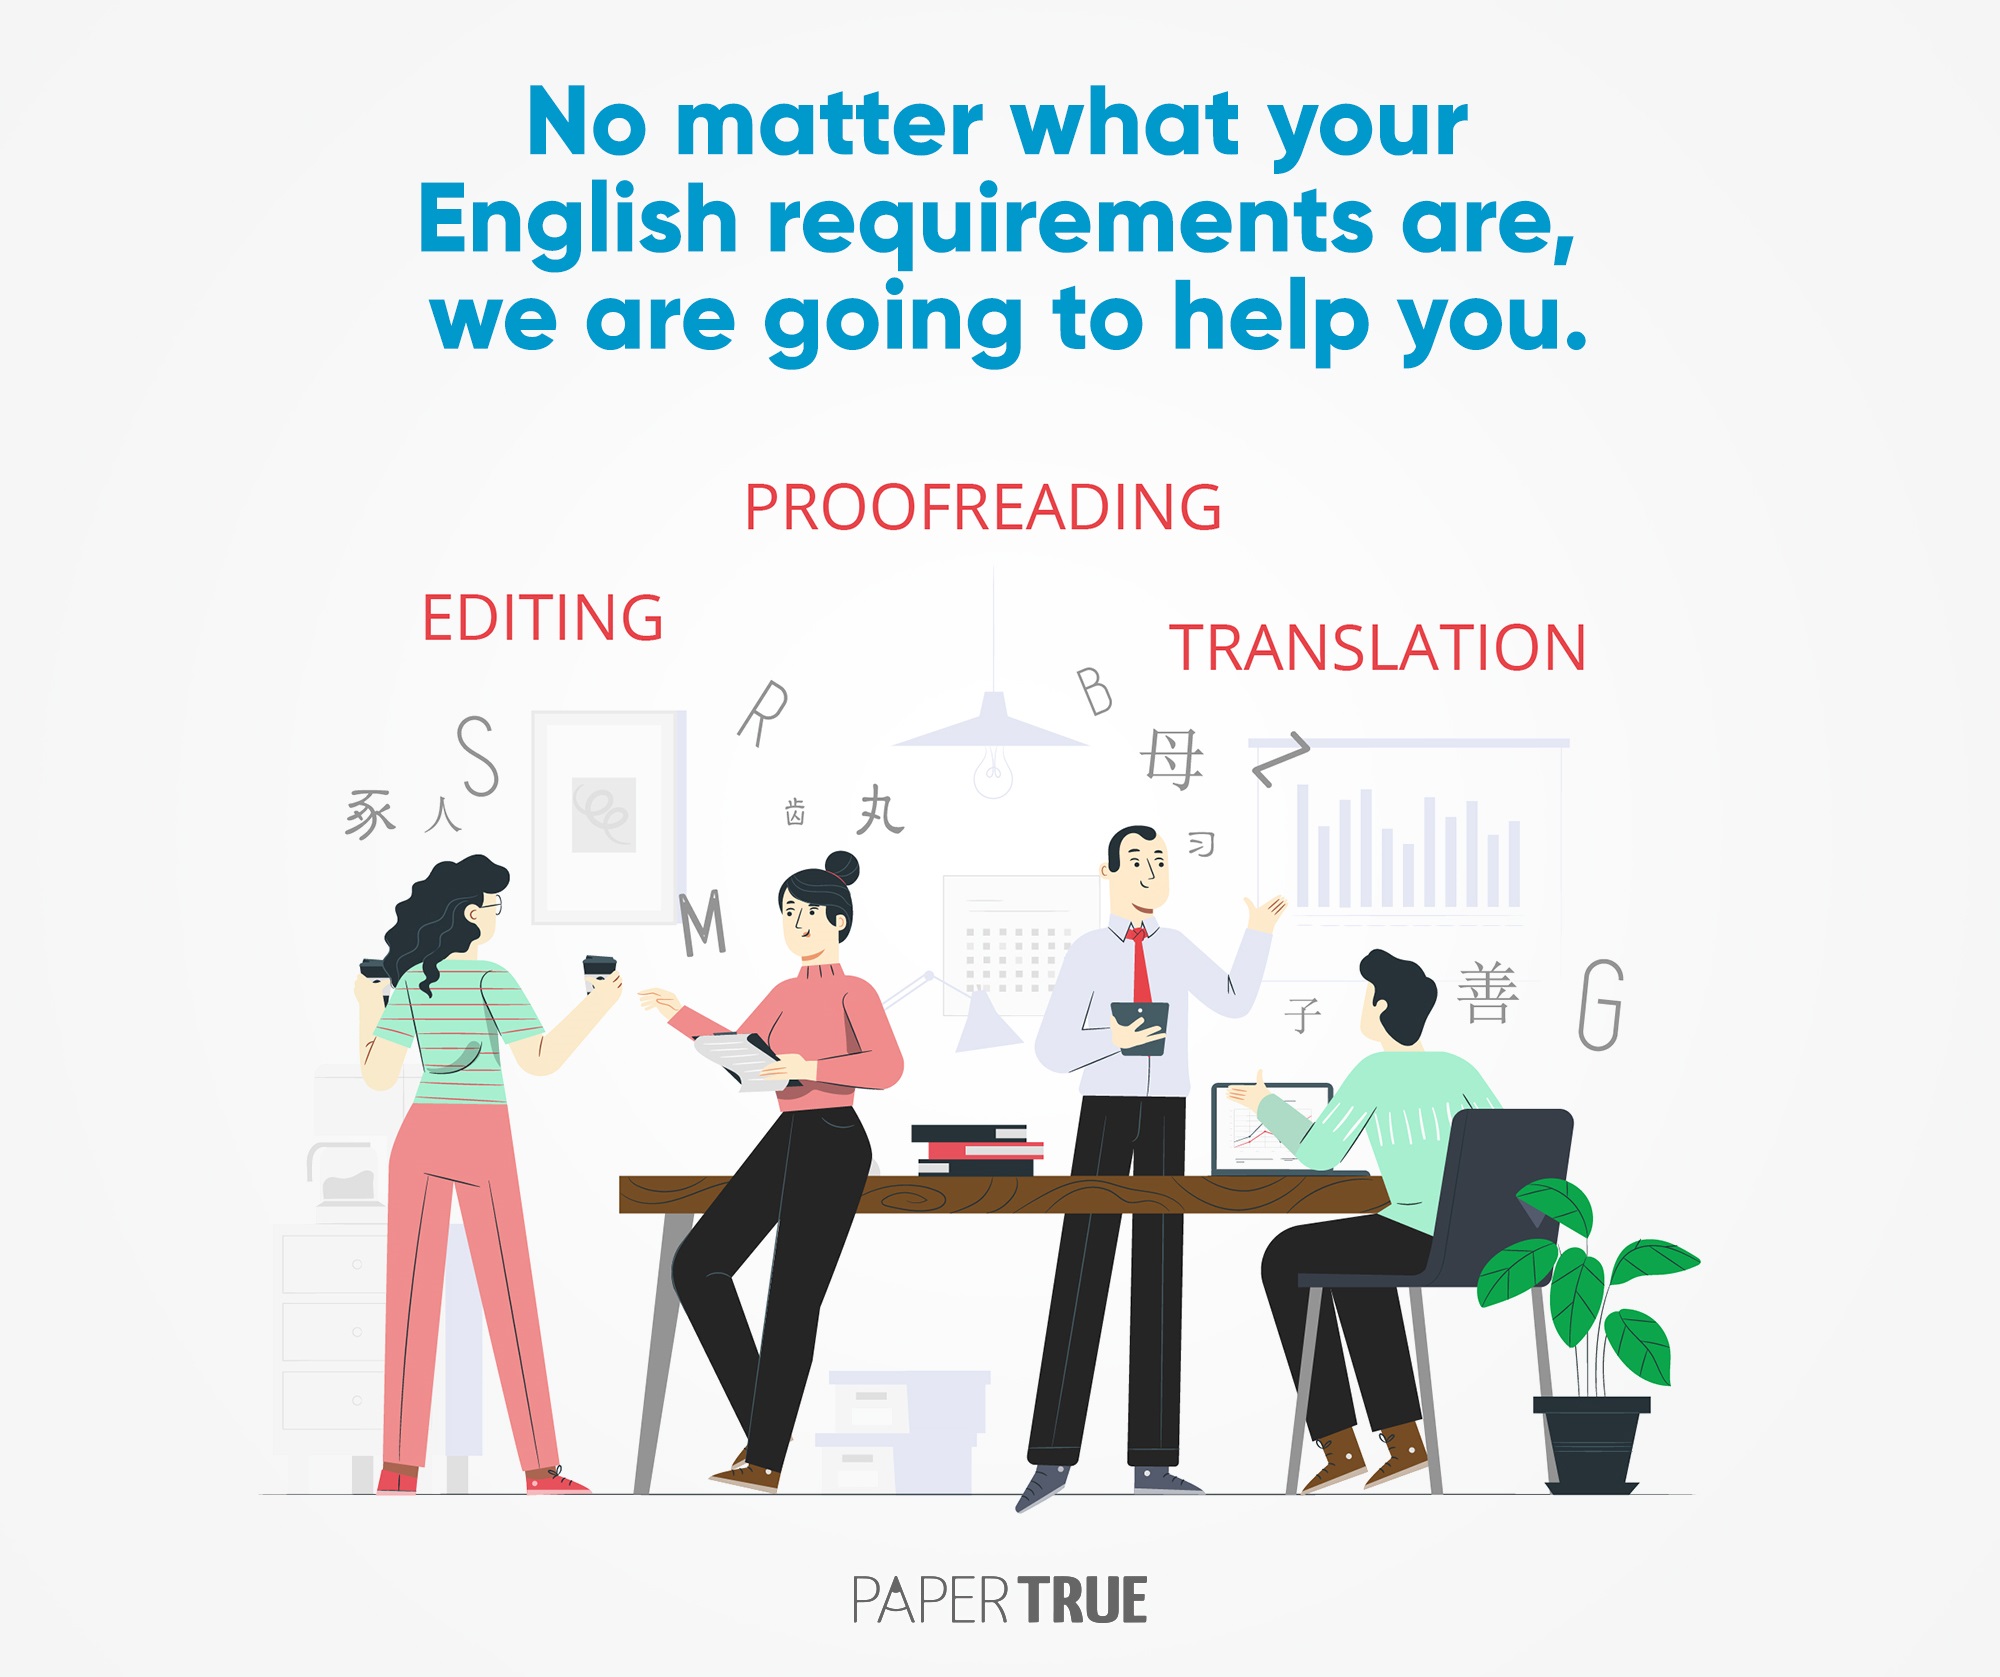 PaperTrue: The Company Catering to China’s English Writing Needs